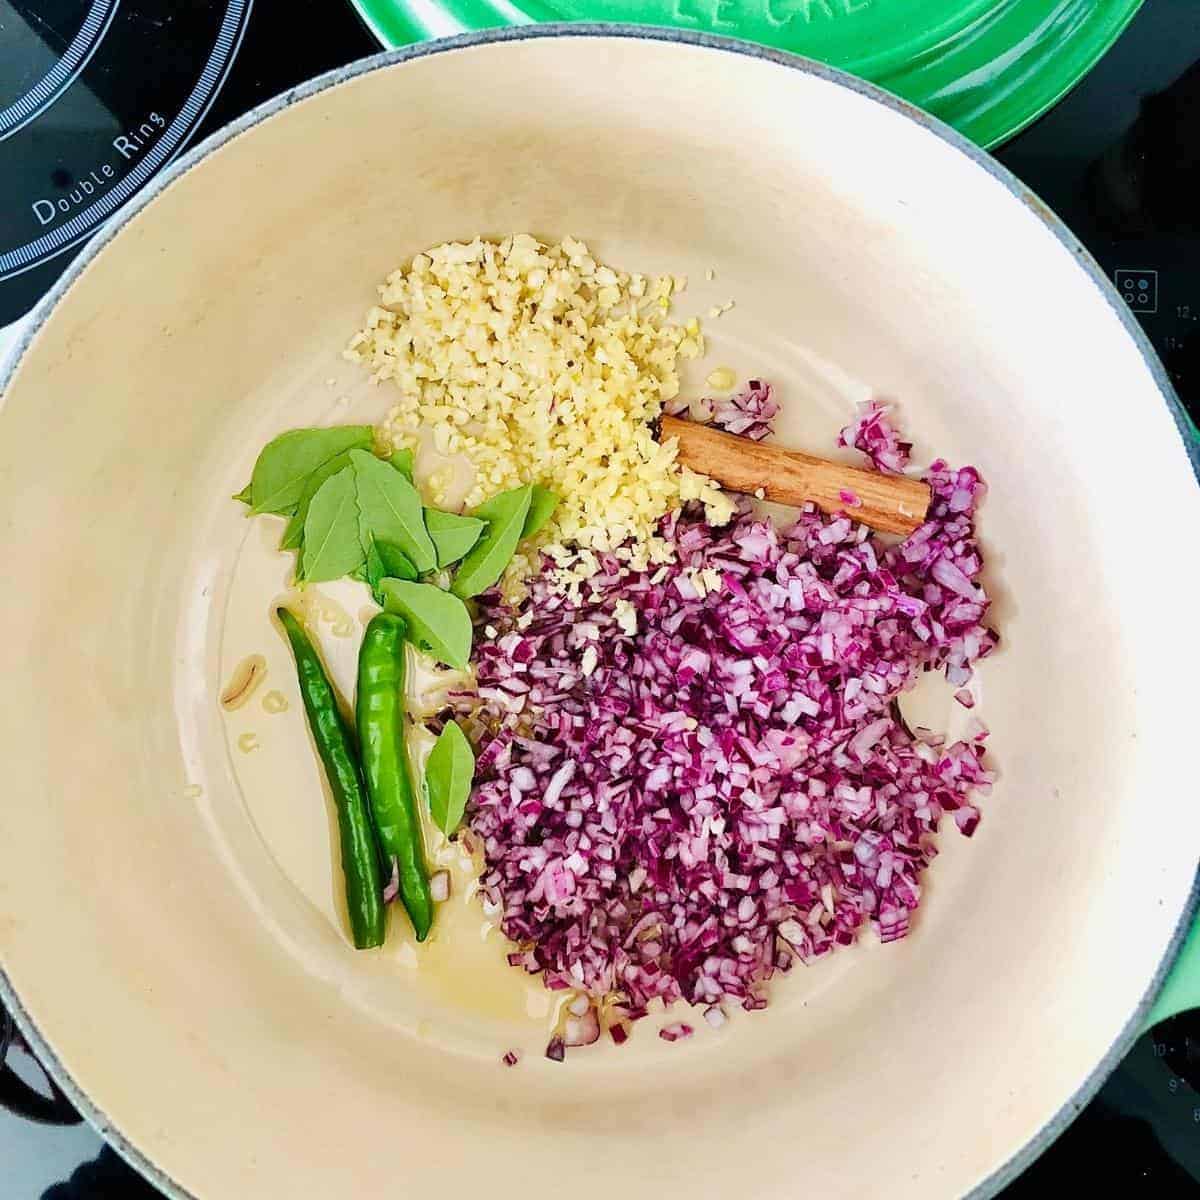 Sautéing finely chopped onions, garlic, ginger, green chilli's, curry leaf and cinnamon stick for ishtew vegetable stew in a ceramic pot.